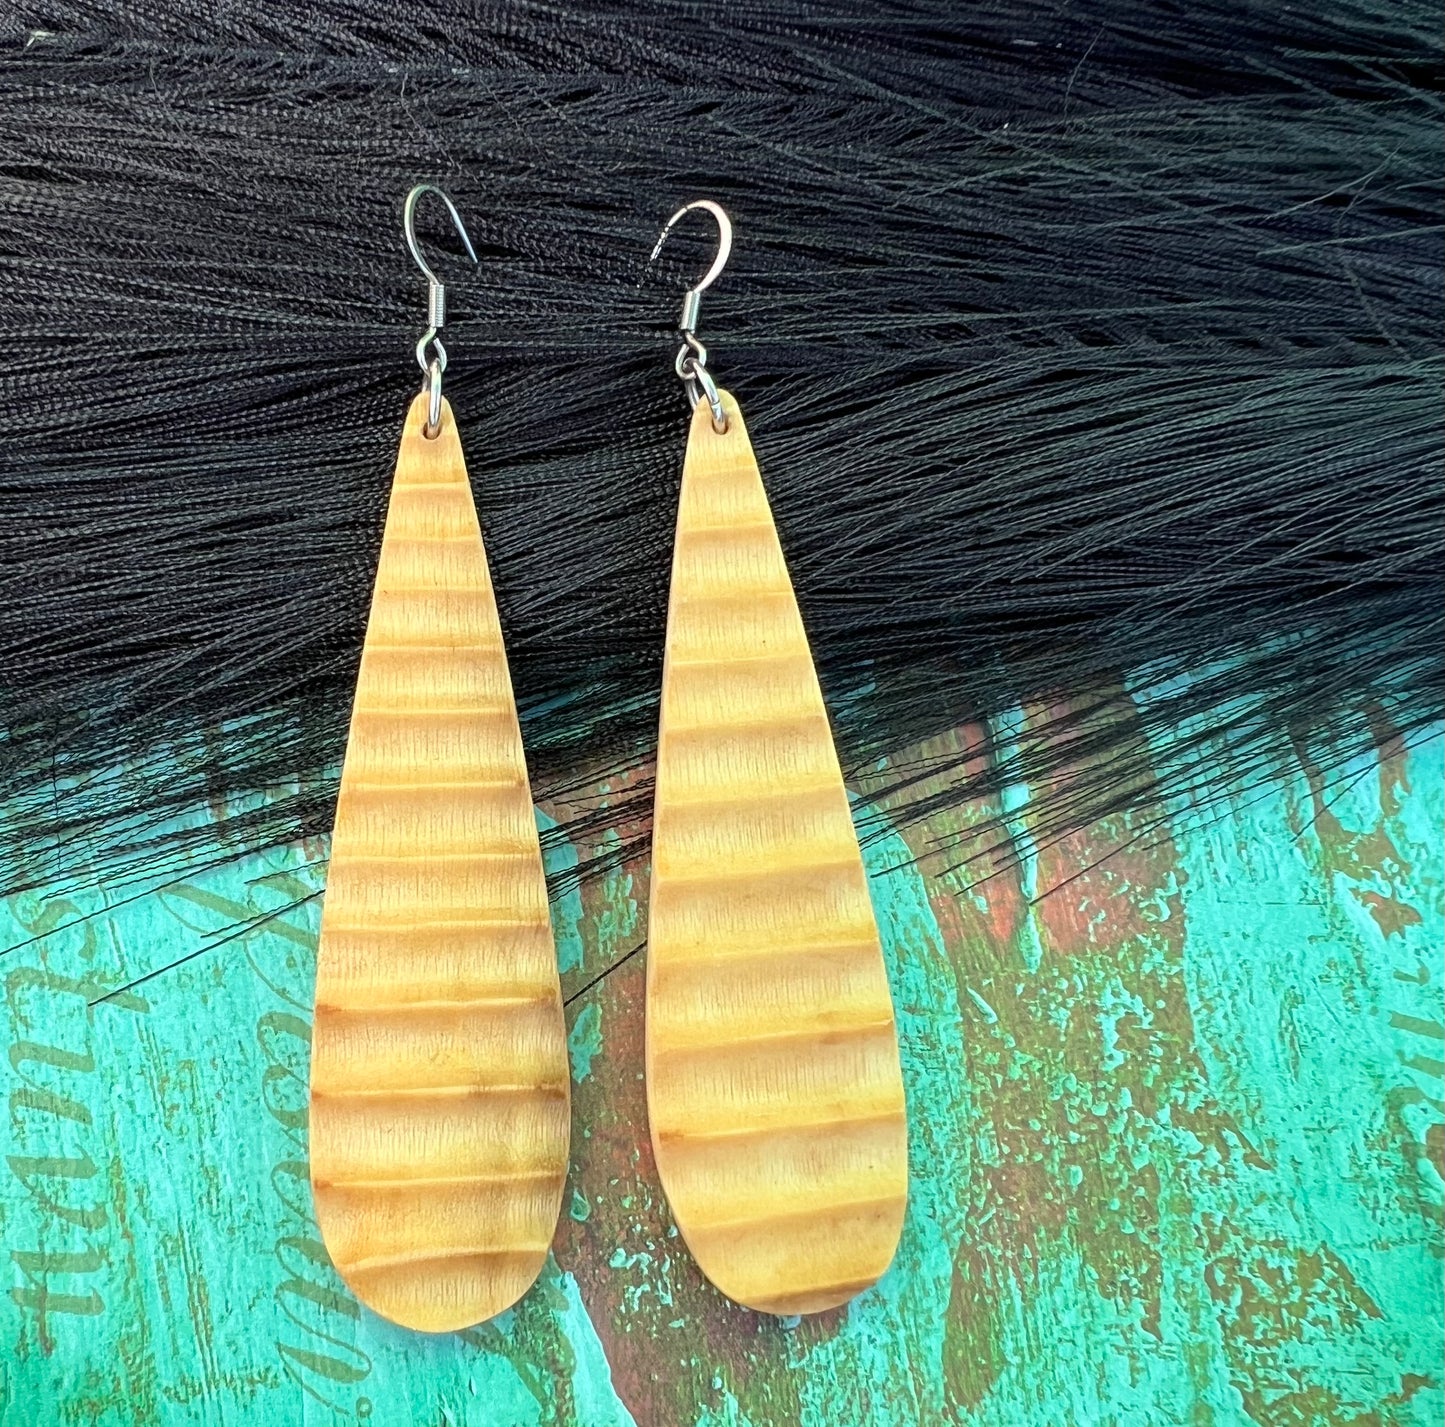 Architectural dangle earrings